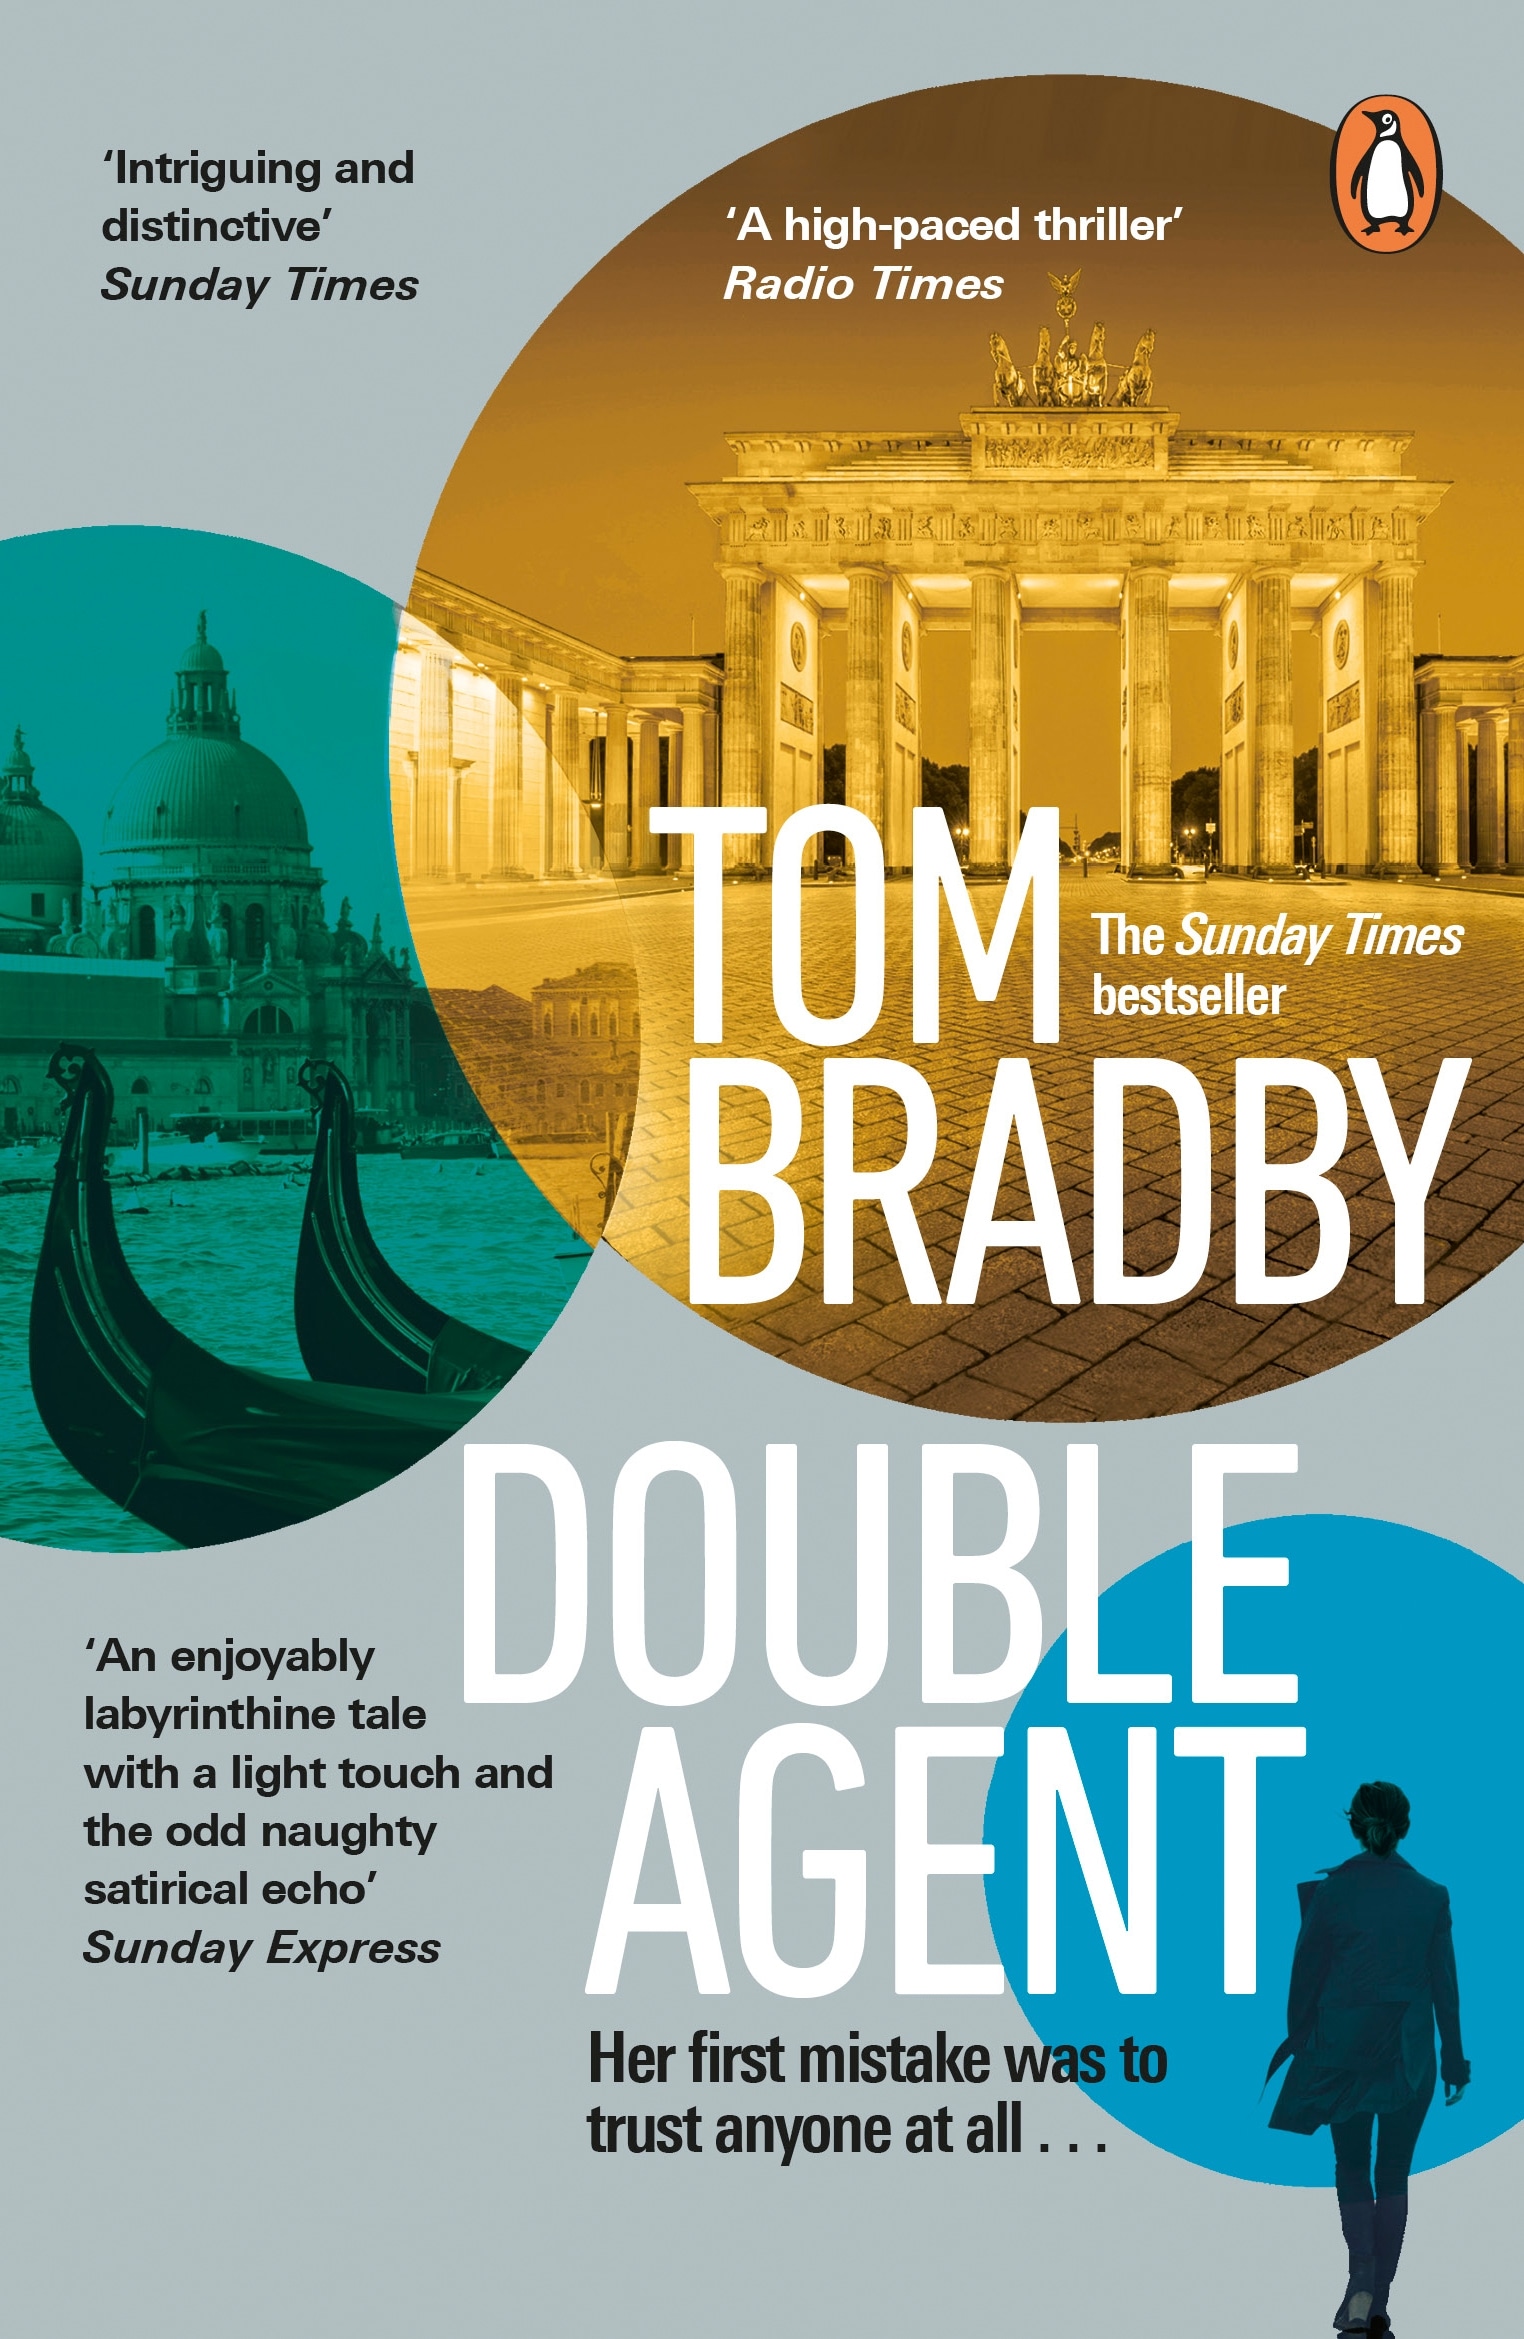 Book “Double Agent” by Tom Bradby — January 7, 2021